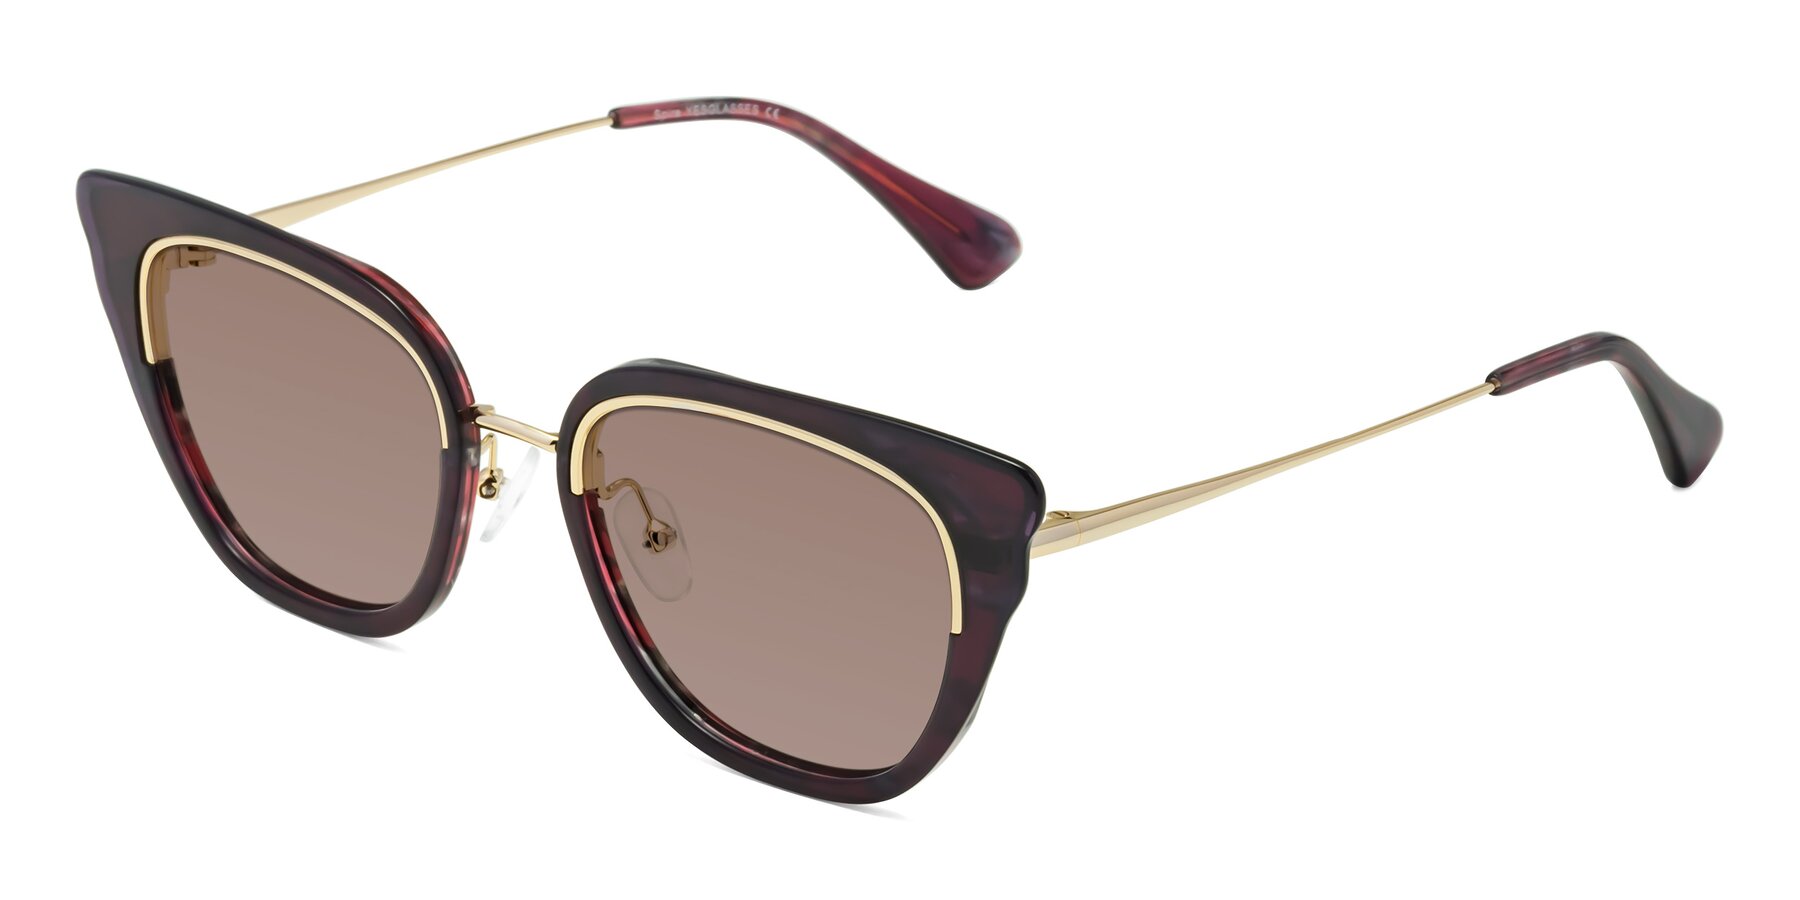 Angle of Spire in Dark Voilet-Gold with Medium Brown Tinted Lenses